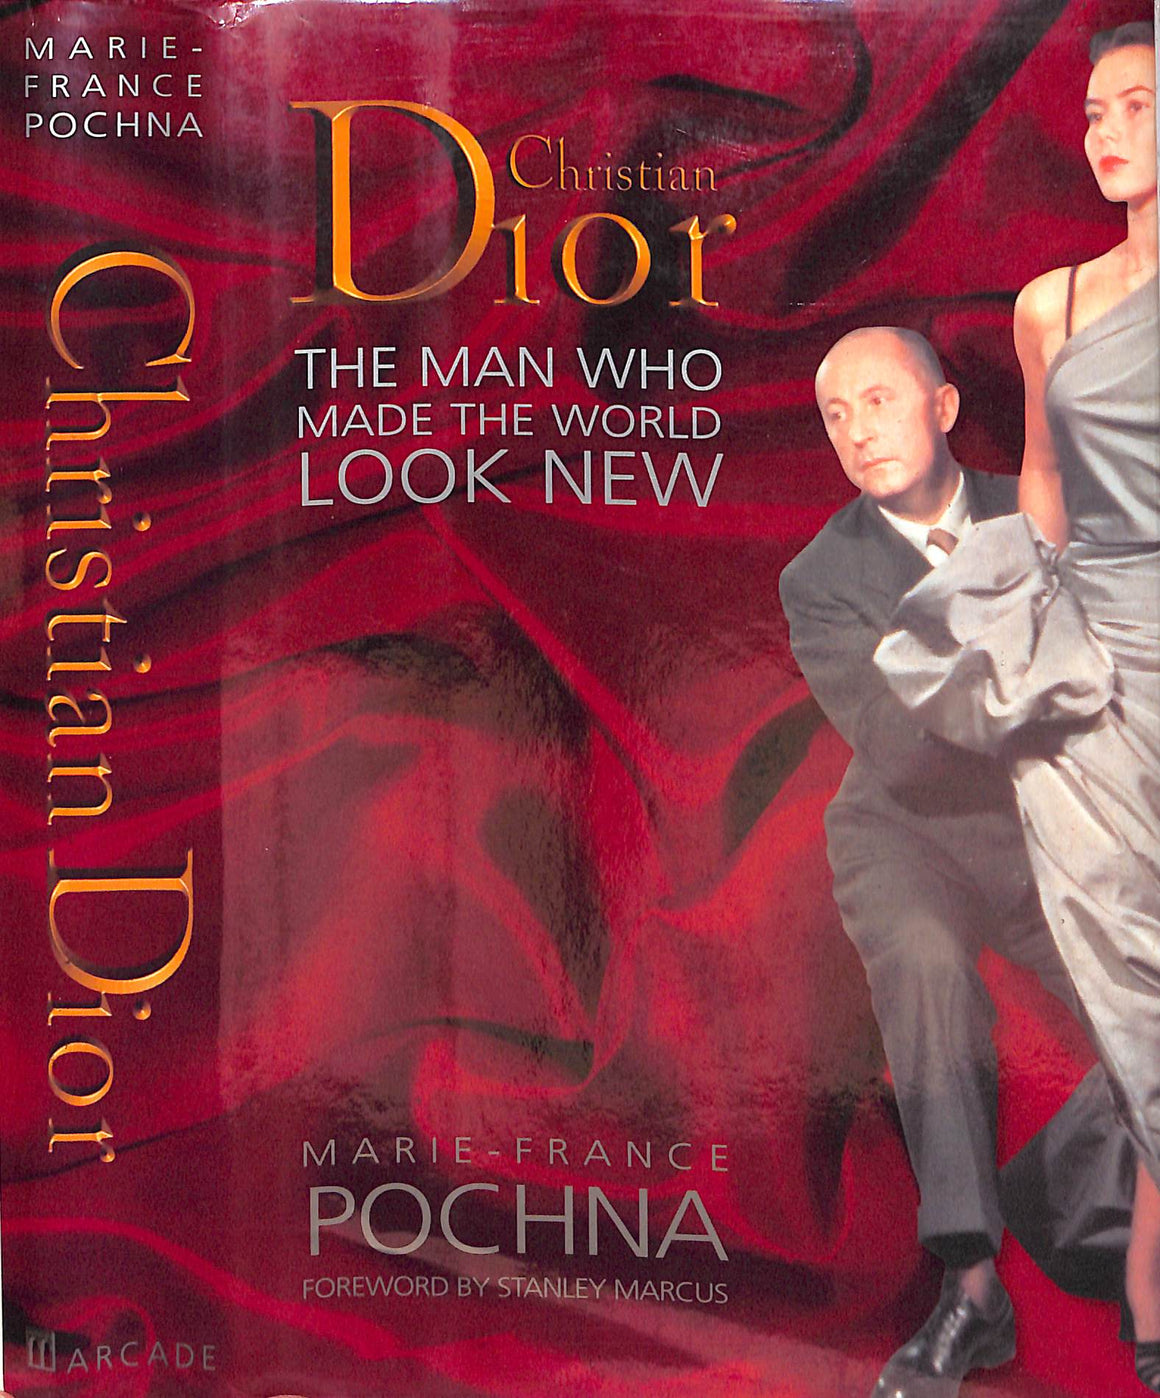 "Christian Dior The Man Who Made The World Look New" 1996 POCHNA, Marie-France (INSCRIBED)